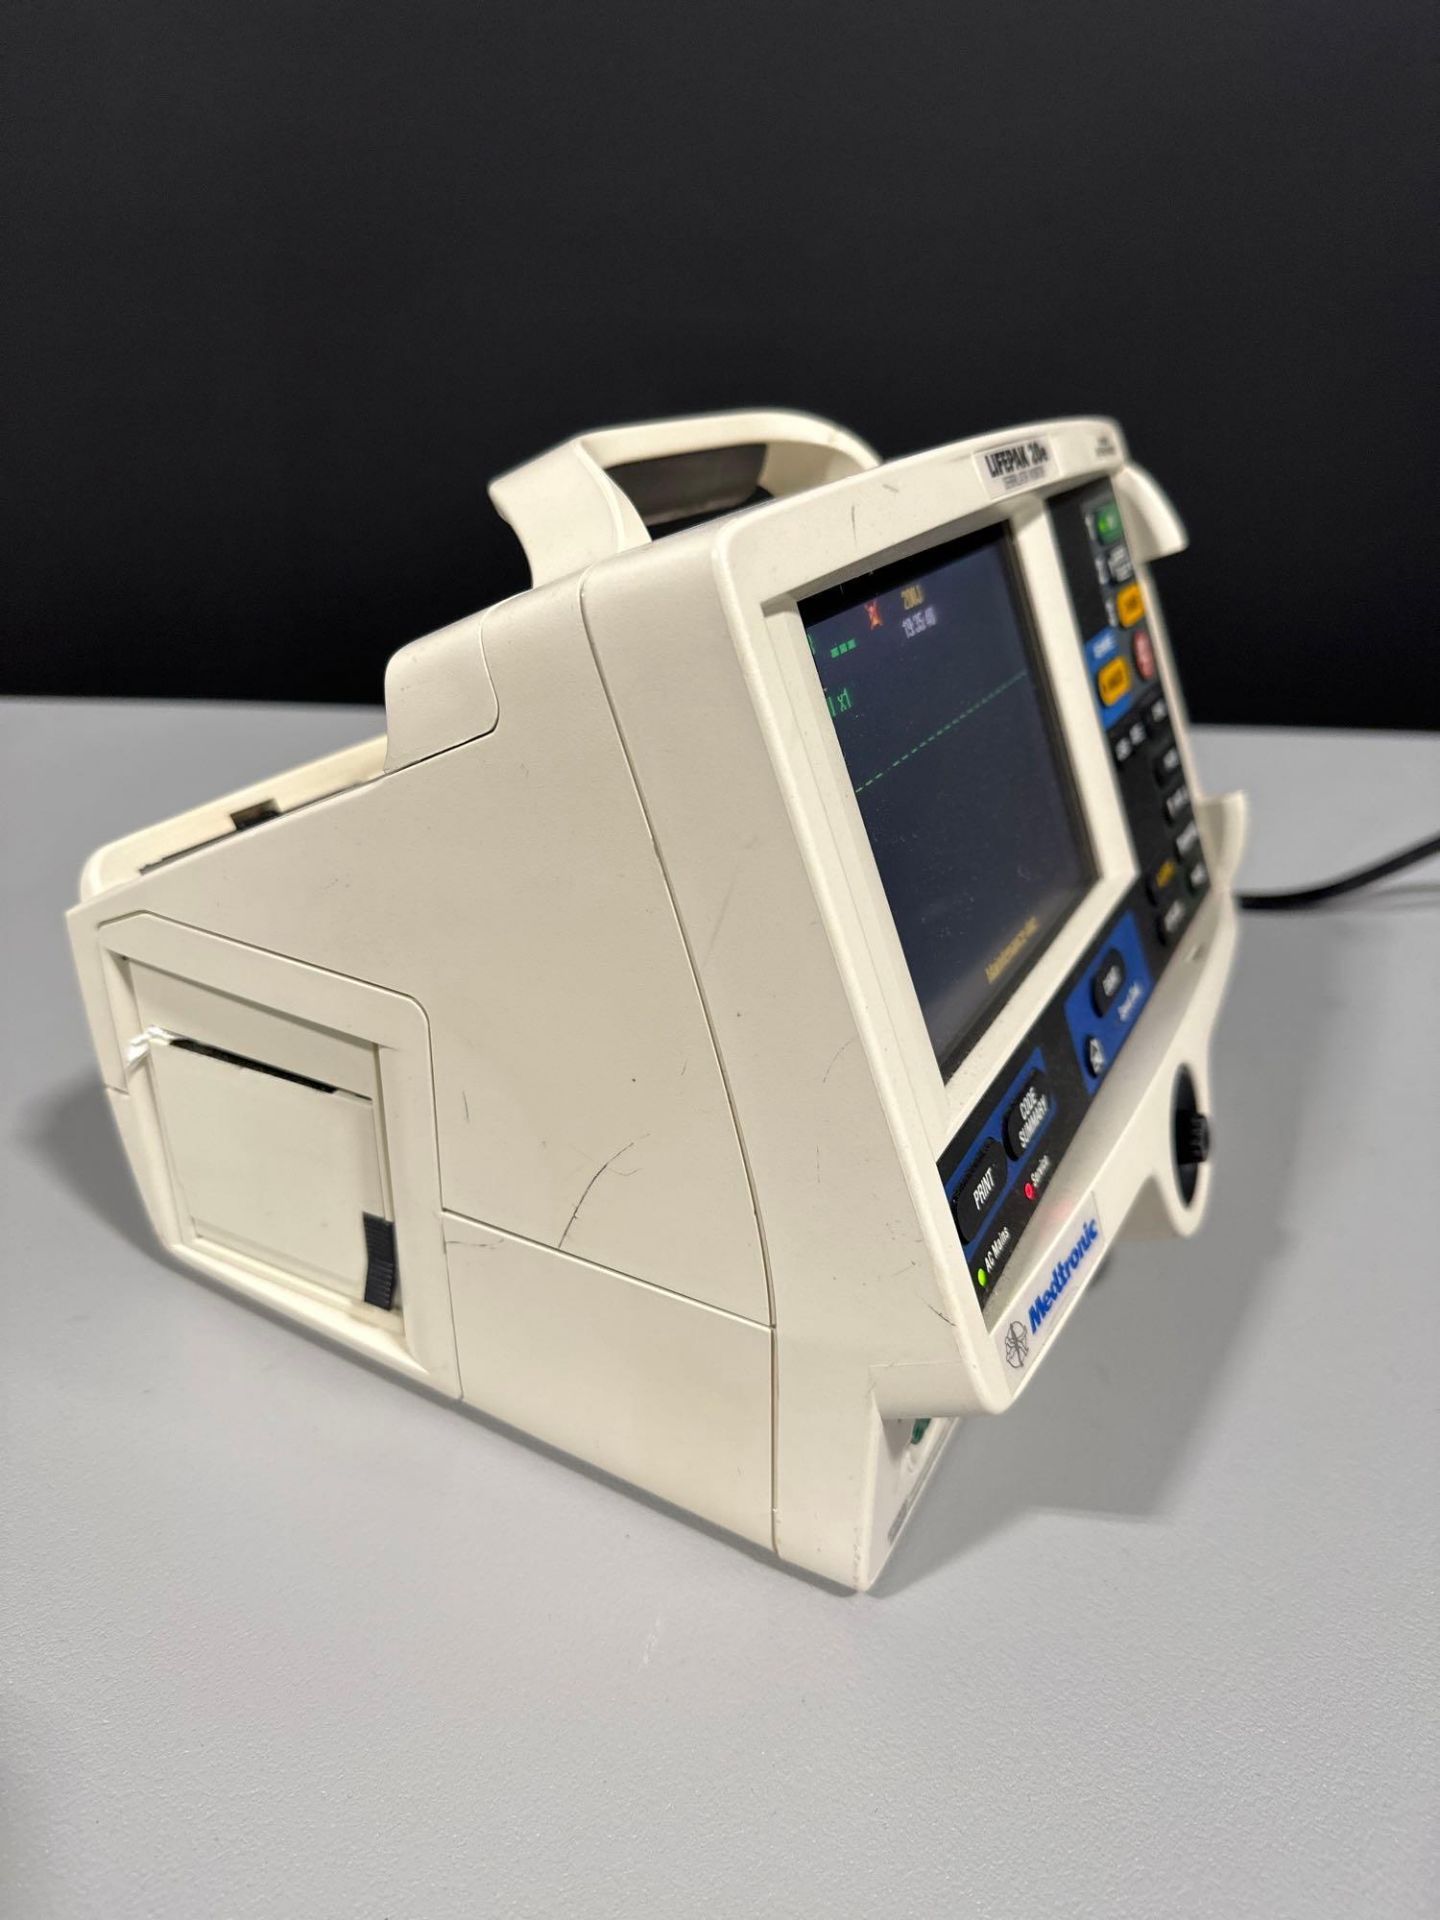 MEDTRONIC/PHYSIO CONTROL LIFEPAK 20E DEFIB WITH PACING, 3 LEAD ECG, ANALYZE (AED MODE) - Image 6 of 8